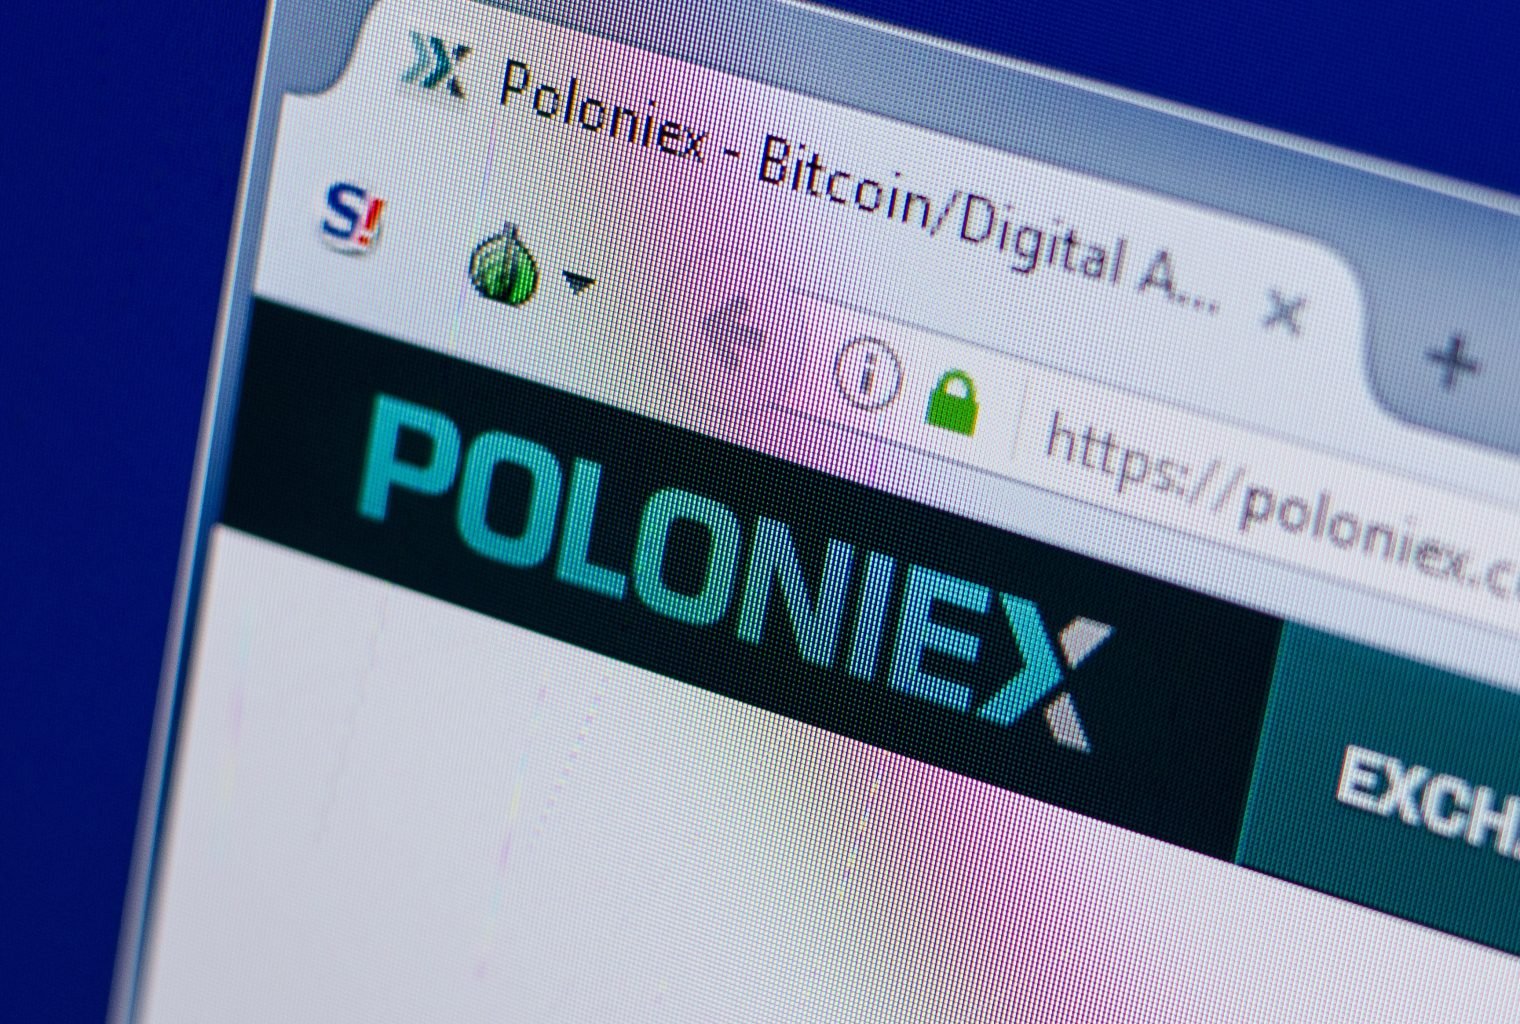 nChain’s Craig Wright Slams Poloniex for Offering BCH Fork “Abusive Naked Short Selling” Option